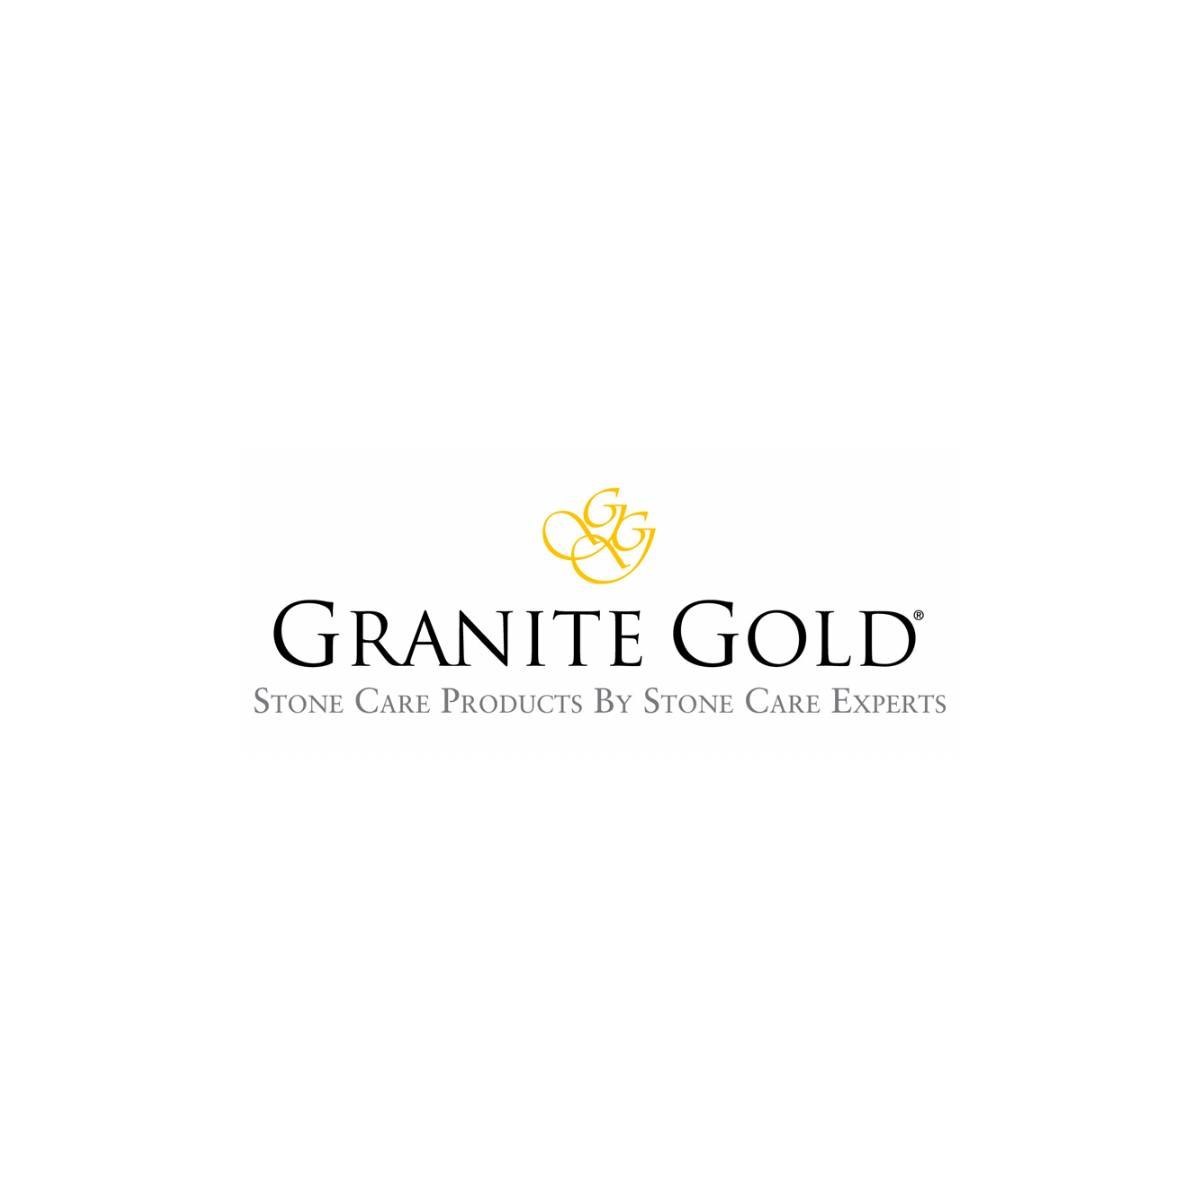 Where to Buy Granite Gold Products